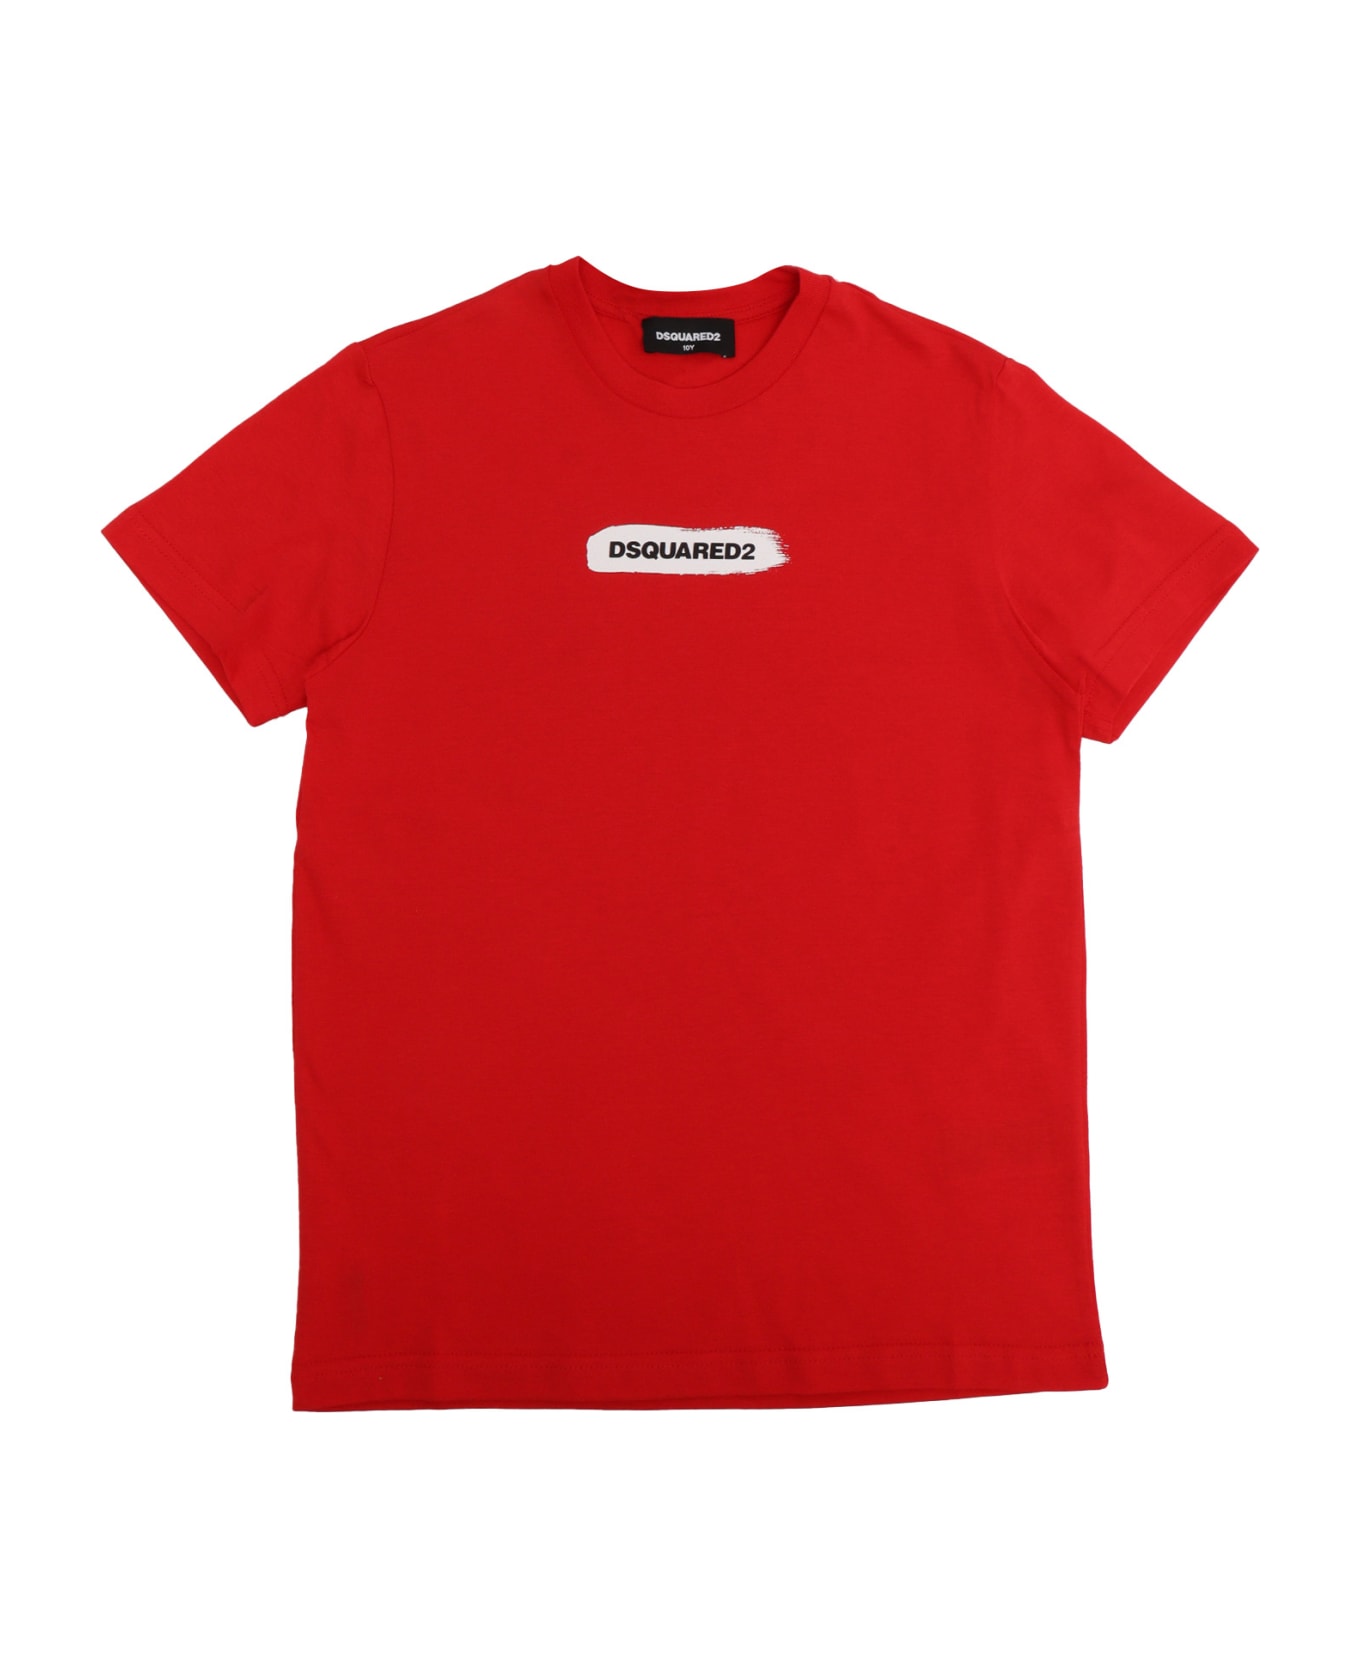 Dsquared2 D-squared2 T-shirt - RED Tシャツ＆ポロシャツ